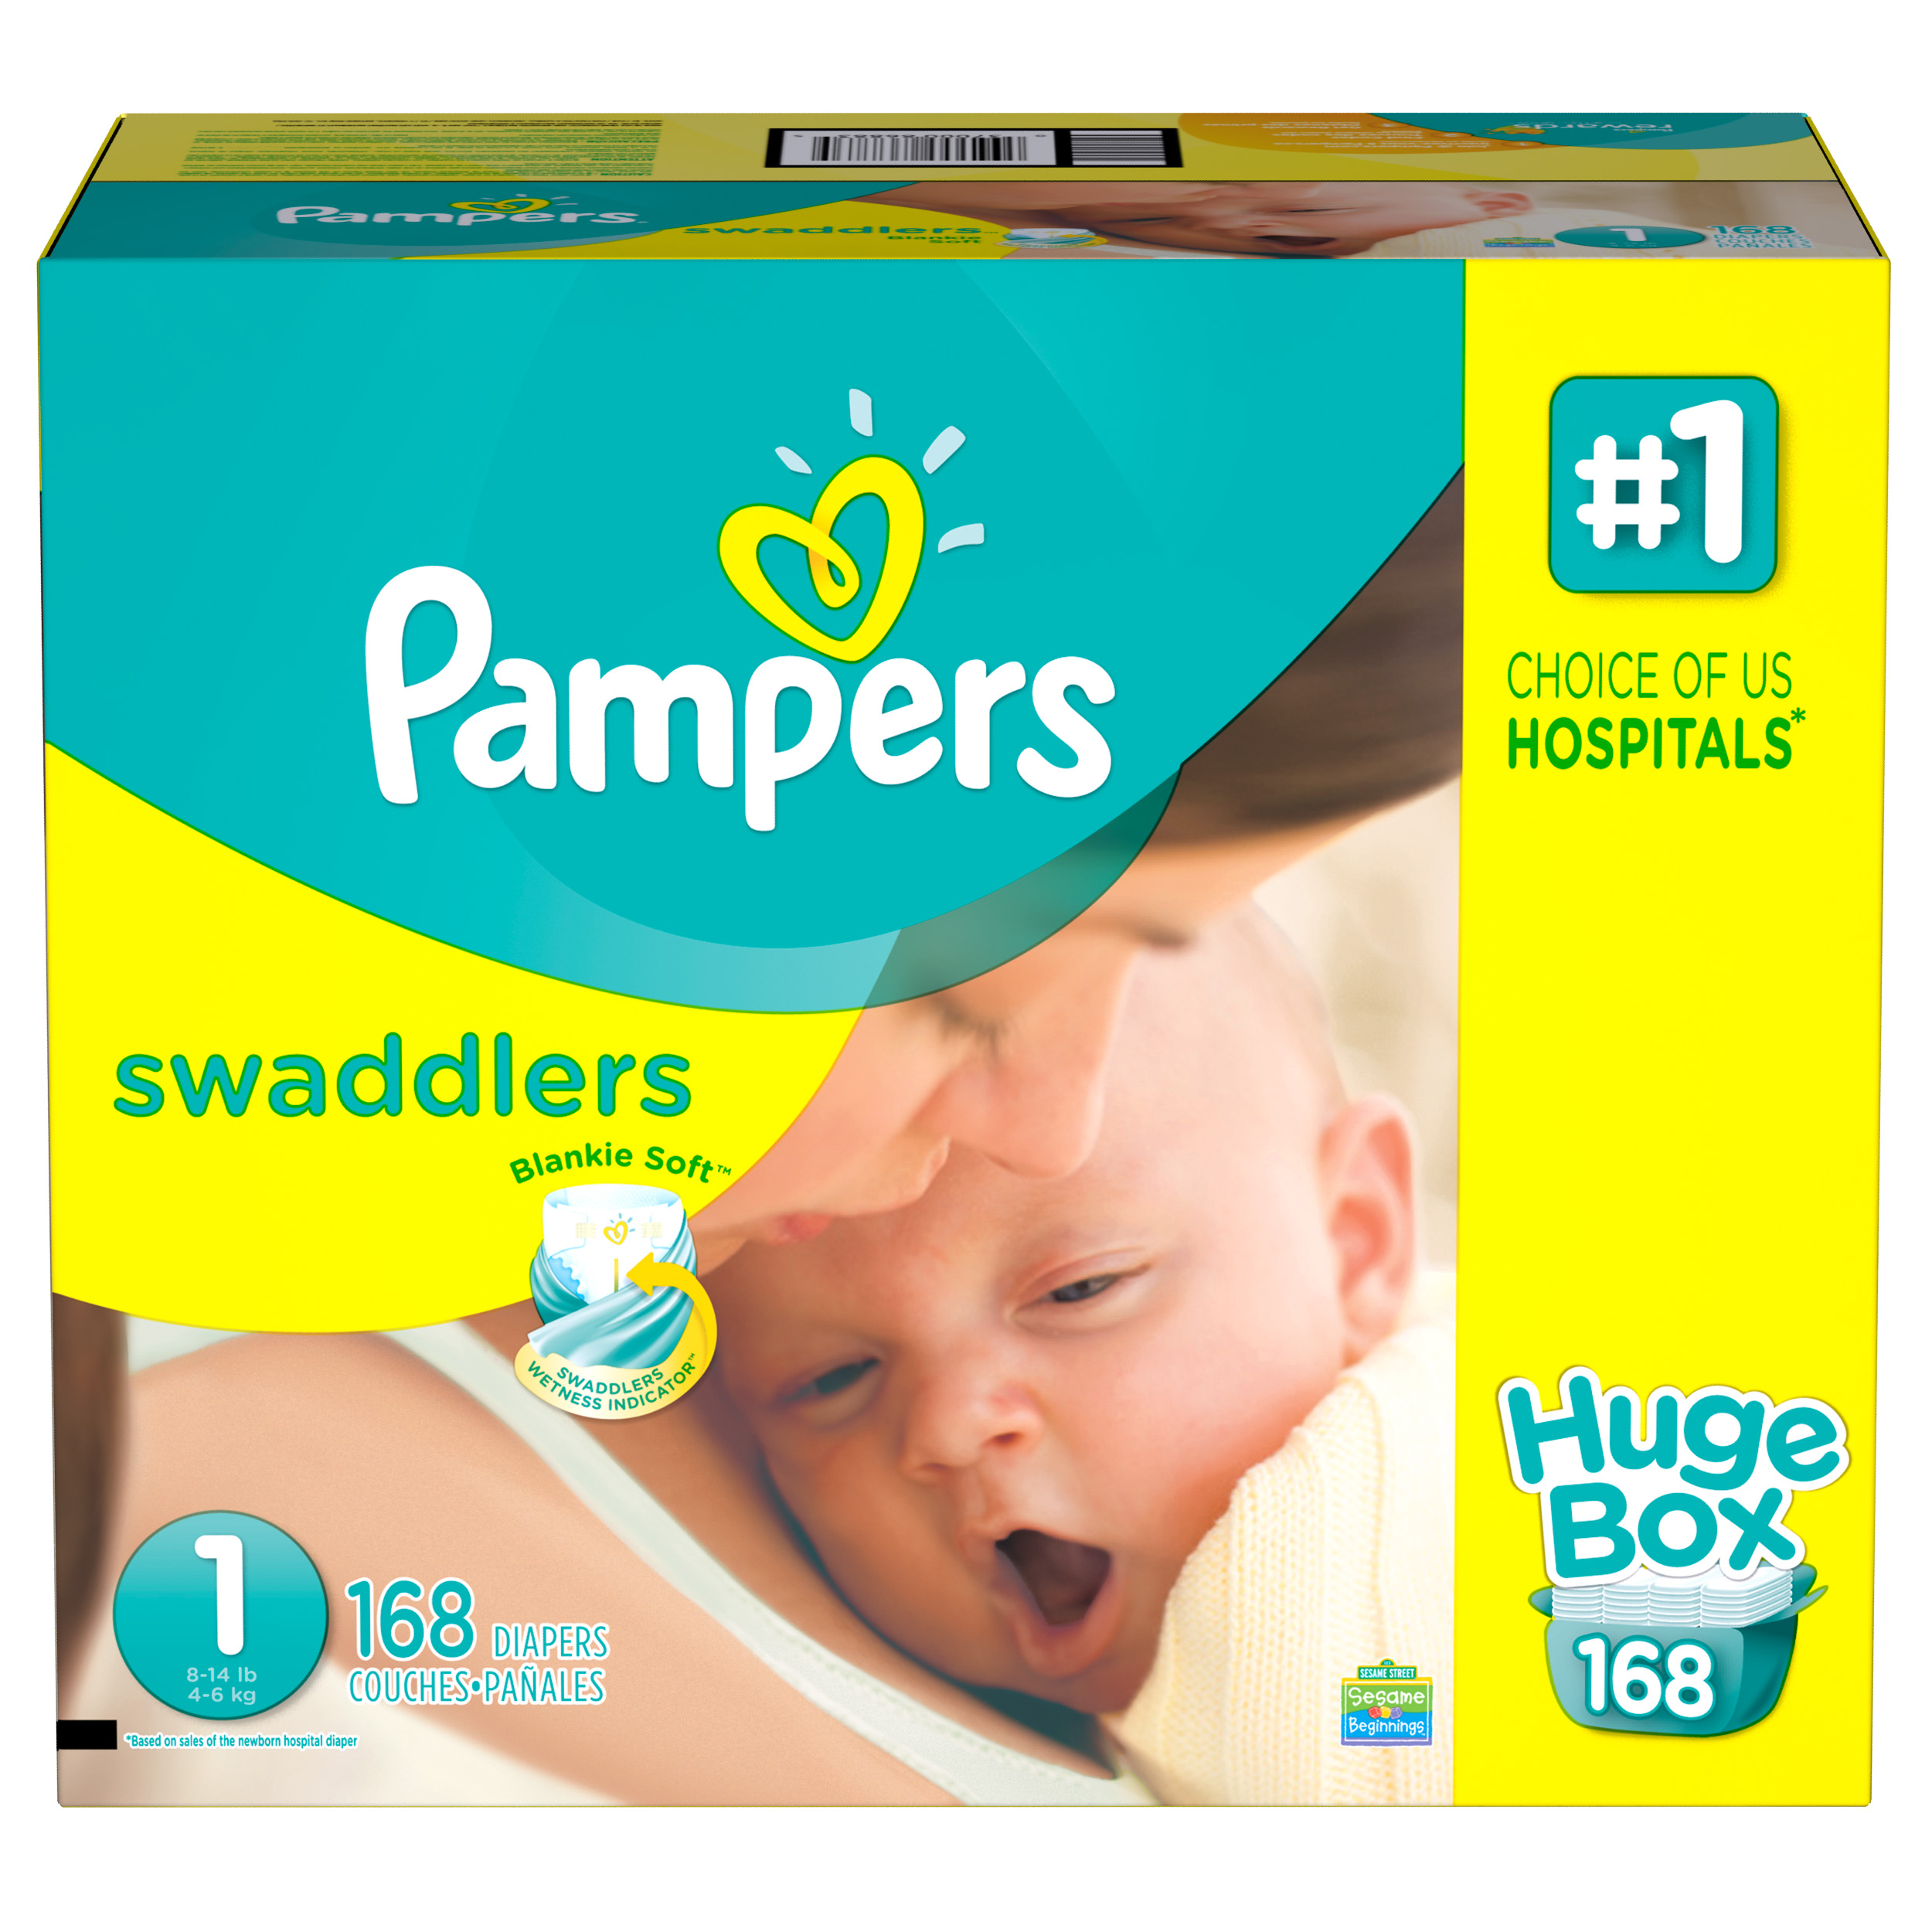 Pampers Swaddlers Soft and Absorbent Newborn Diapers, Size 1, 168 Ct - image 5 of 10